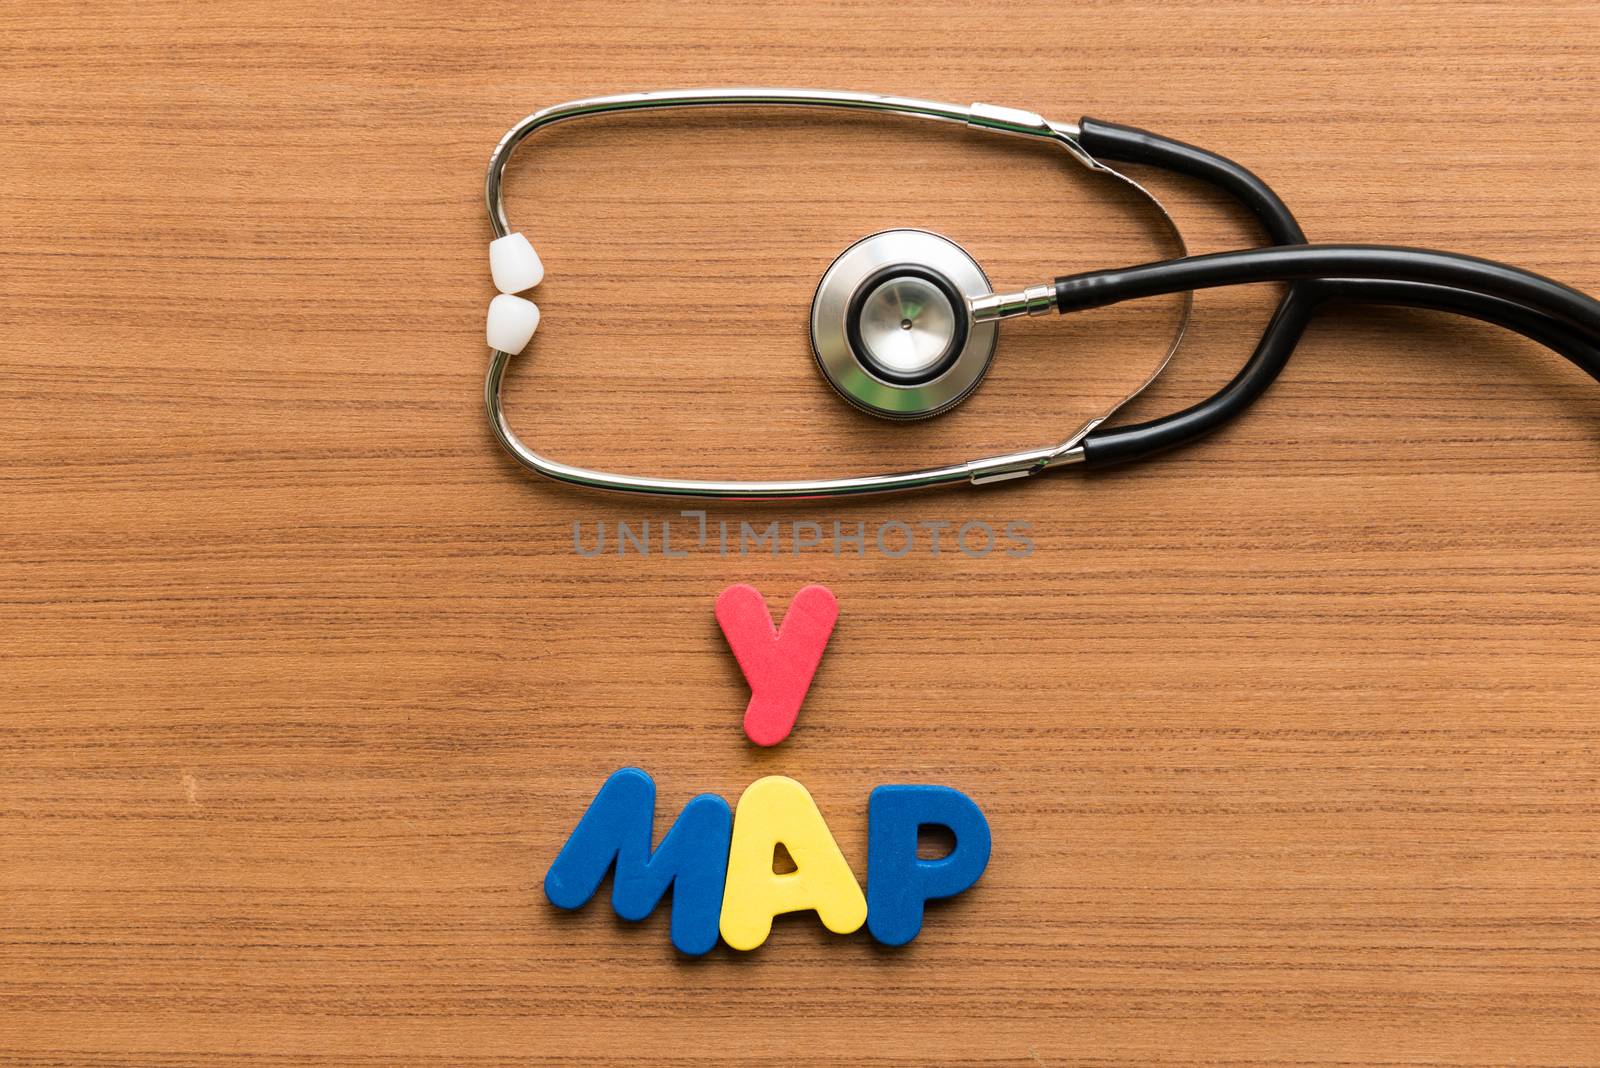 y map colorful word with stethoscope on wooden background